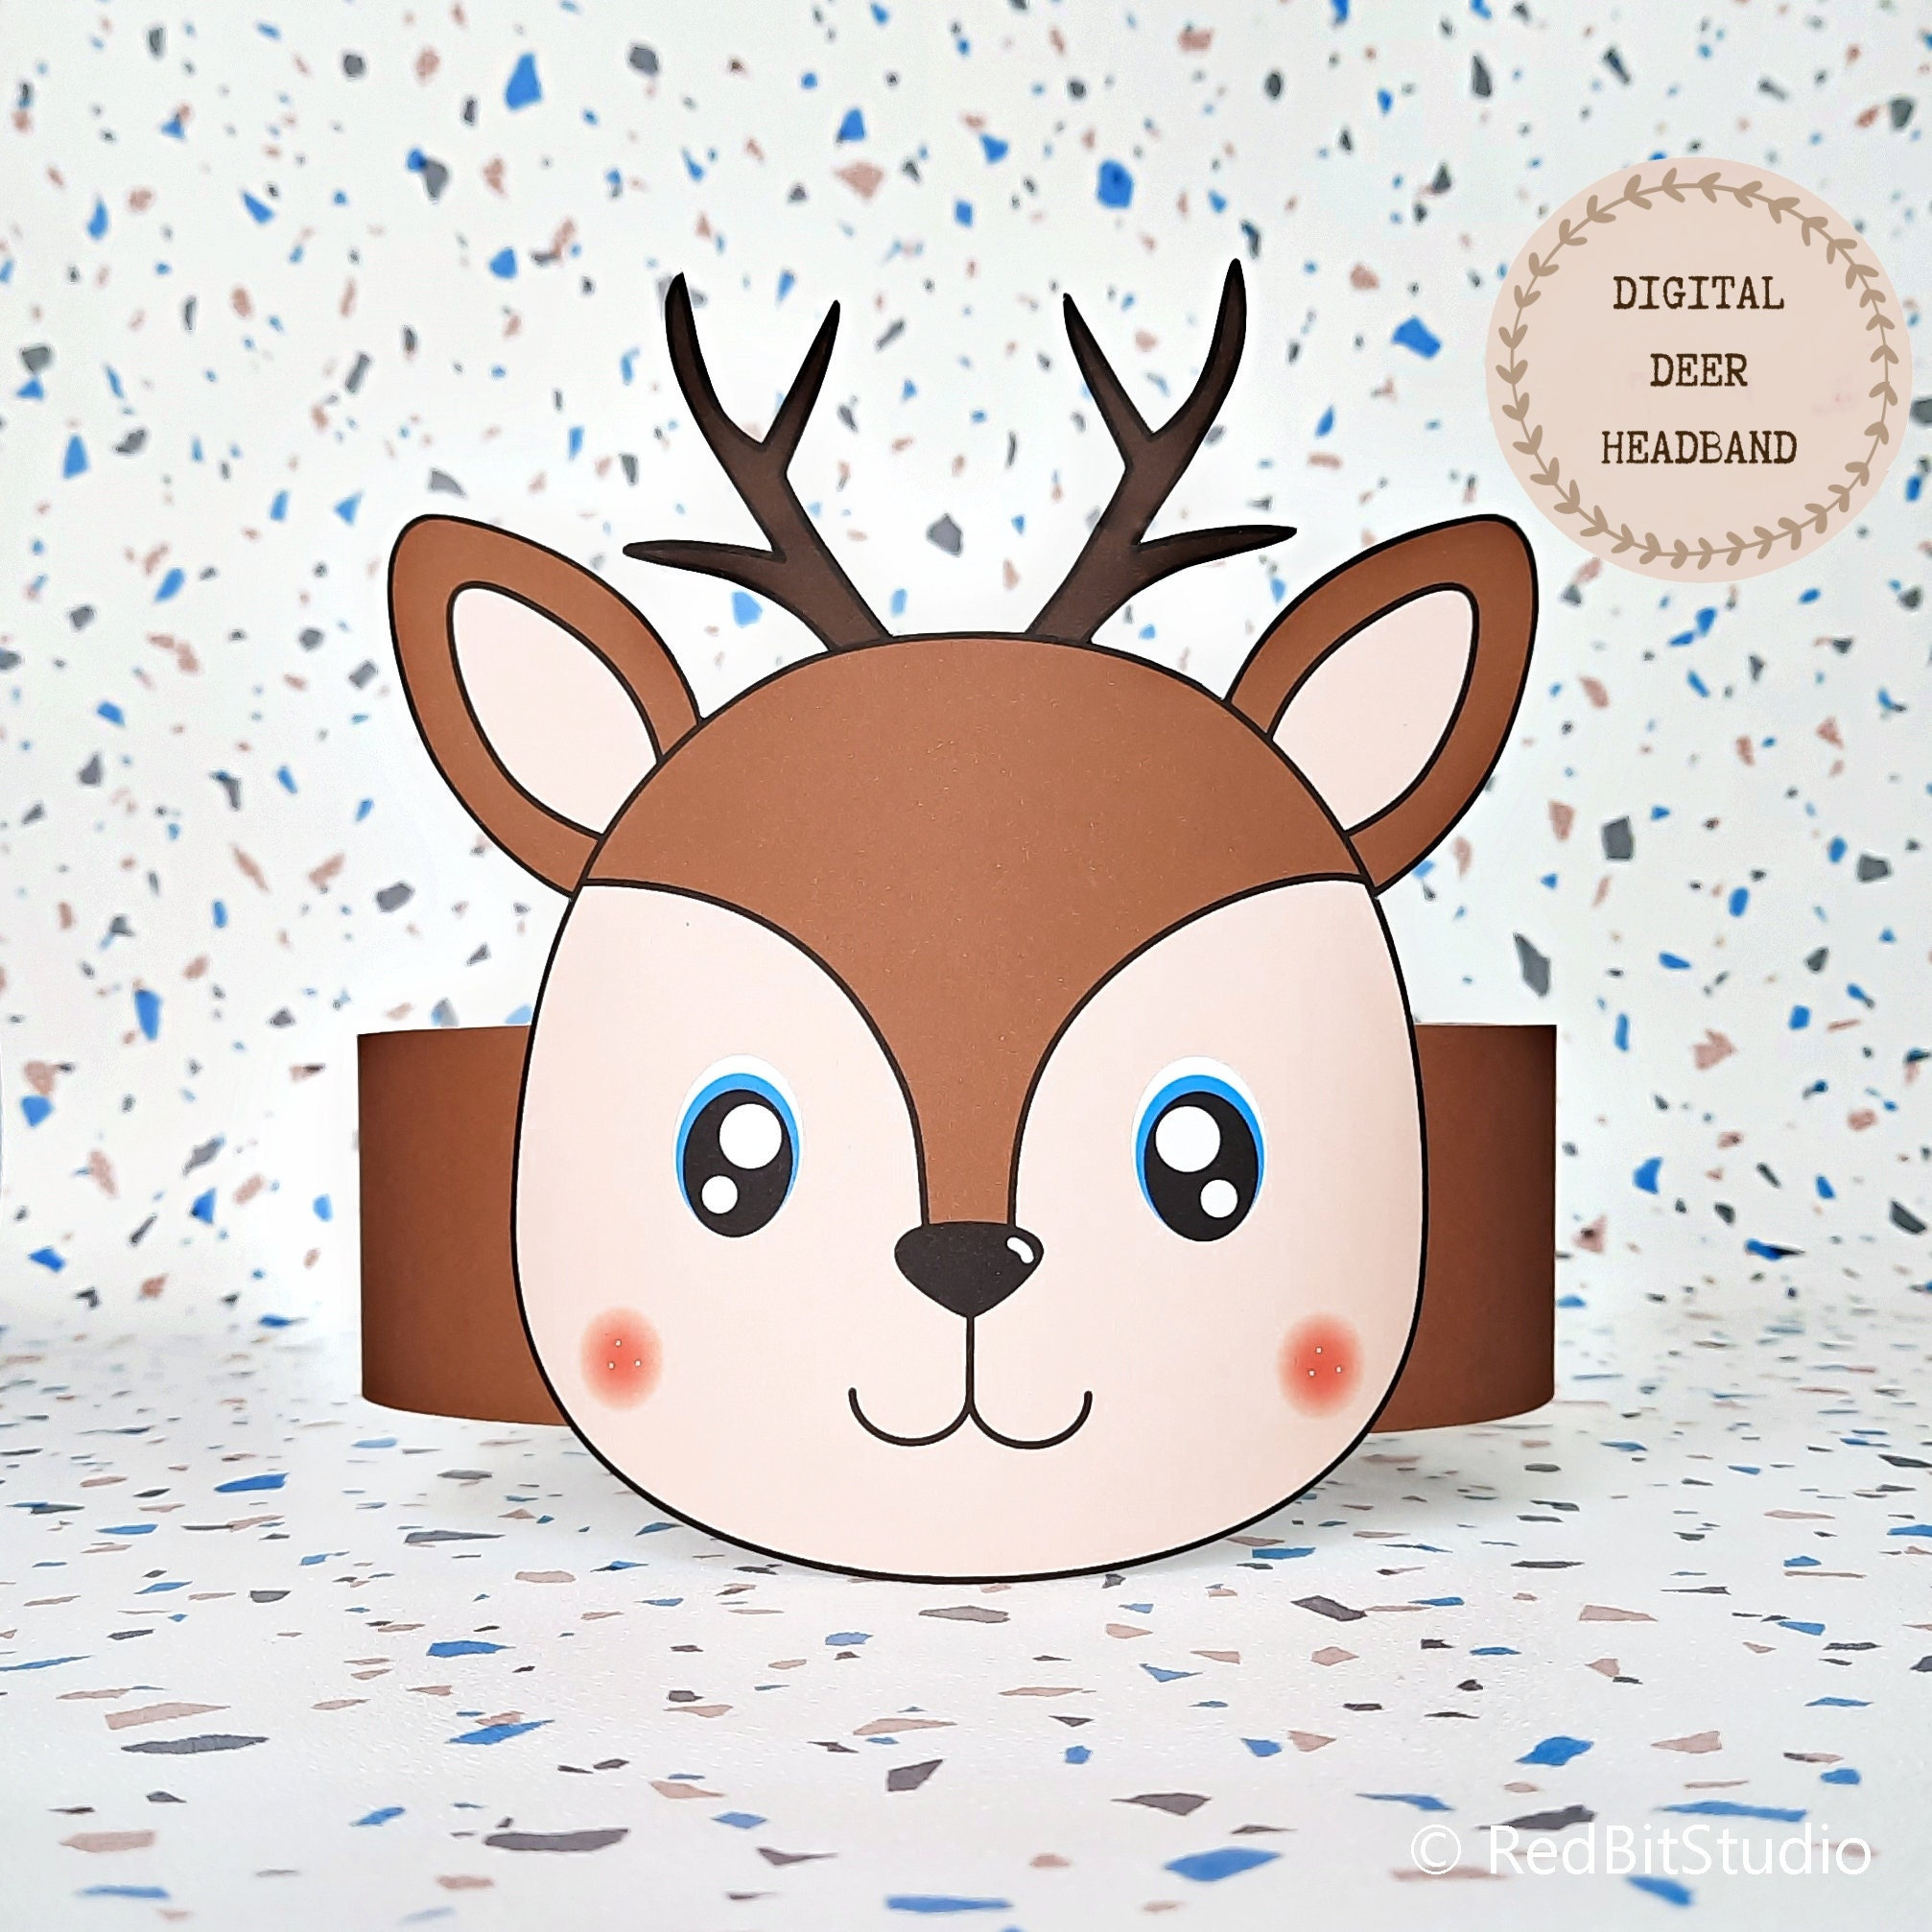 DIY Birthday Party Supplies for Kids/toddlers, Paper Hats, Crafts, Face  Masks/costumes Woodland Forest Animals: Rabbit, Deer, Owl, Skunk 